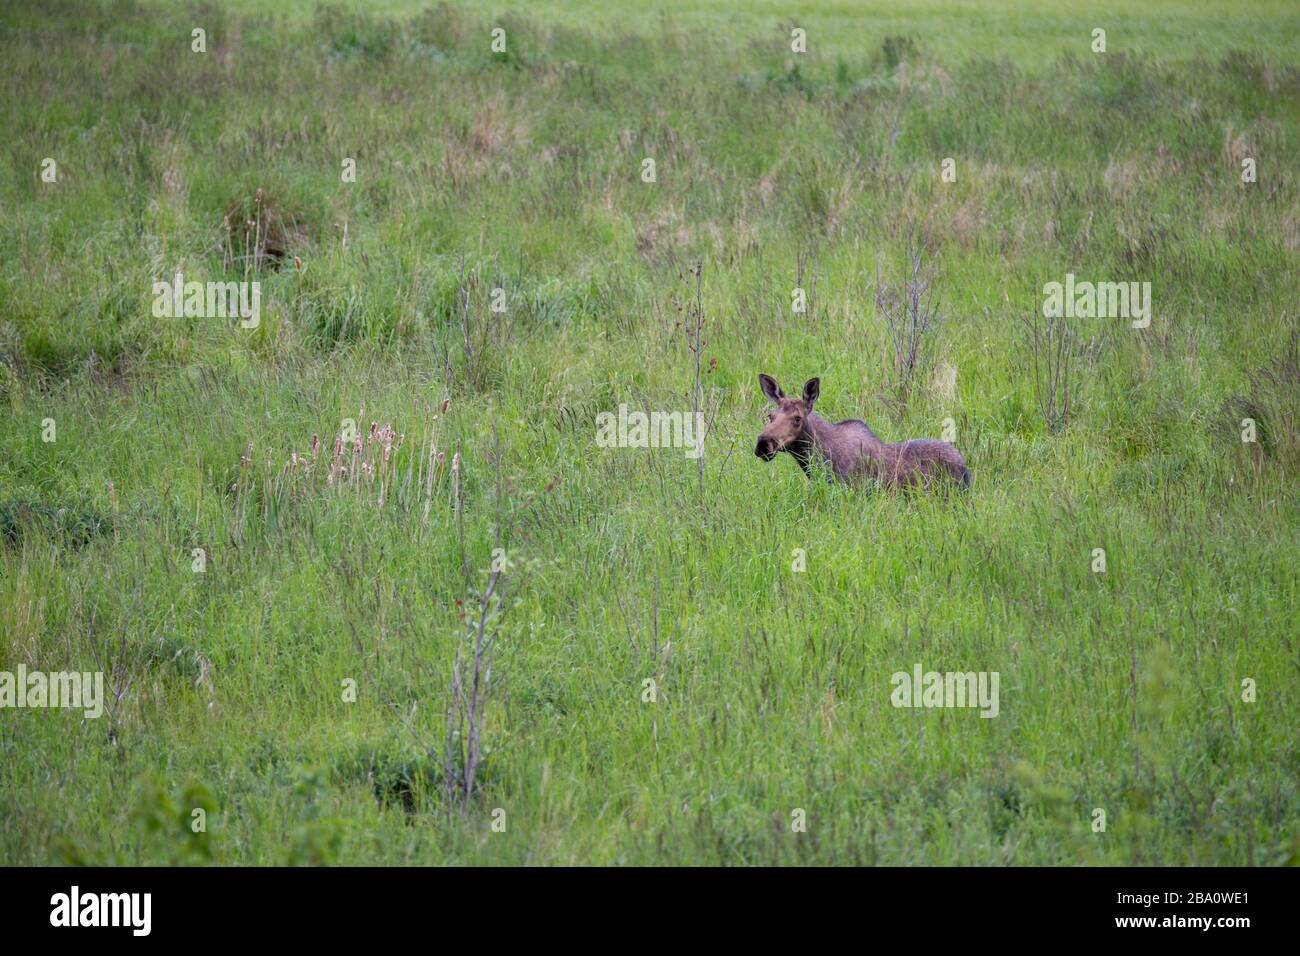 Moose in a field of grass Stock Photo